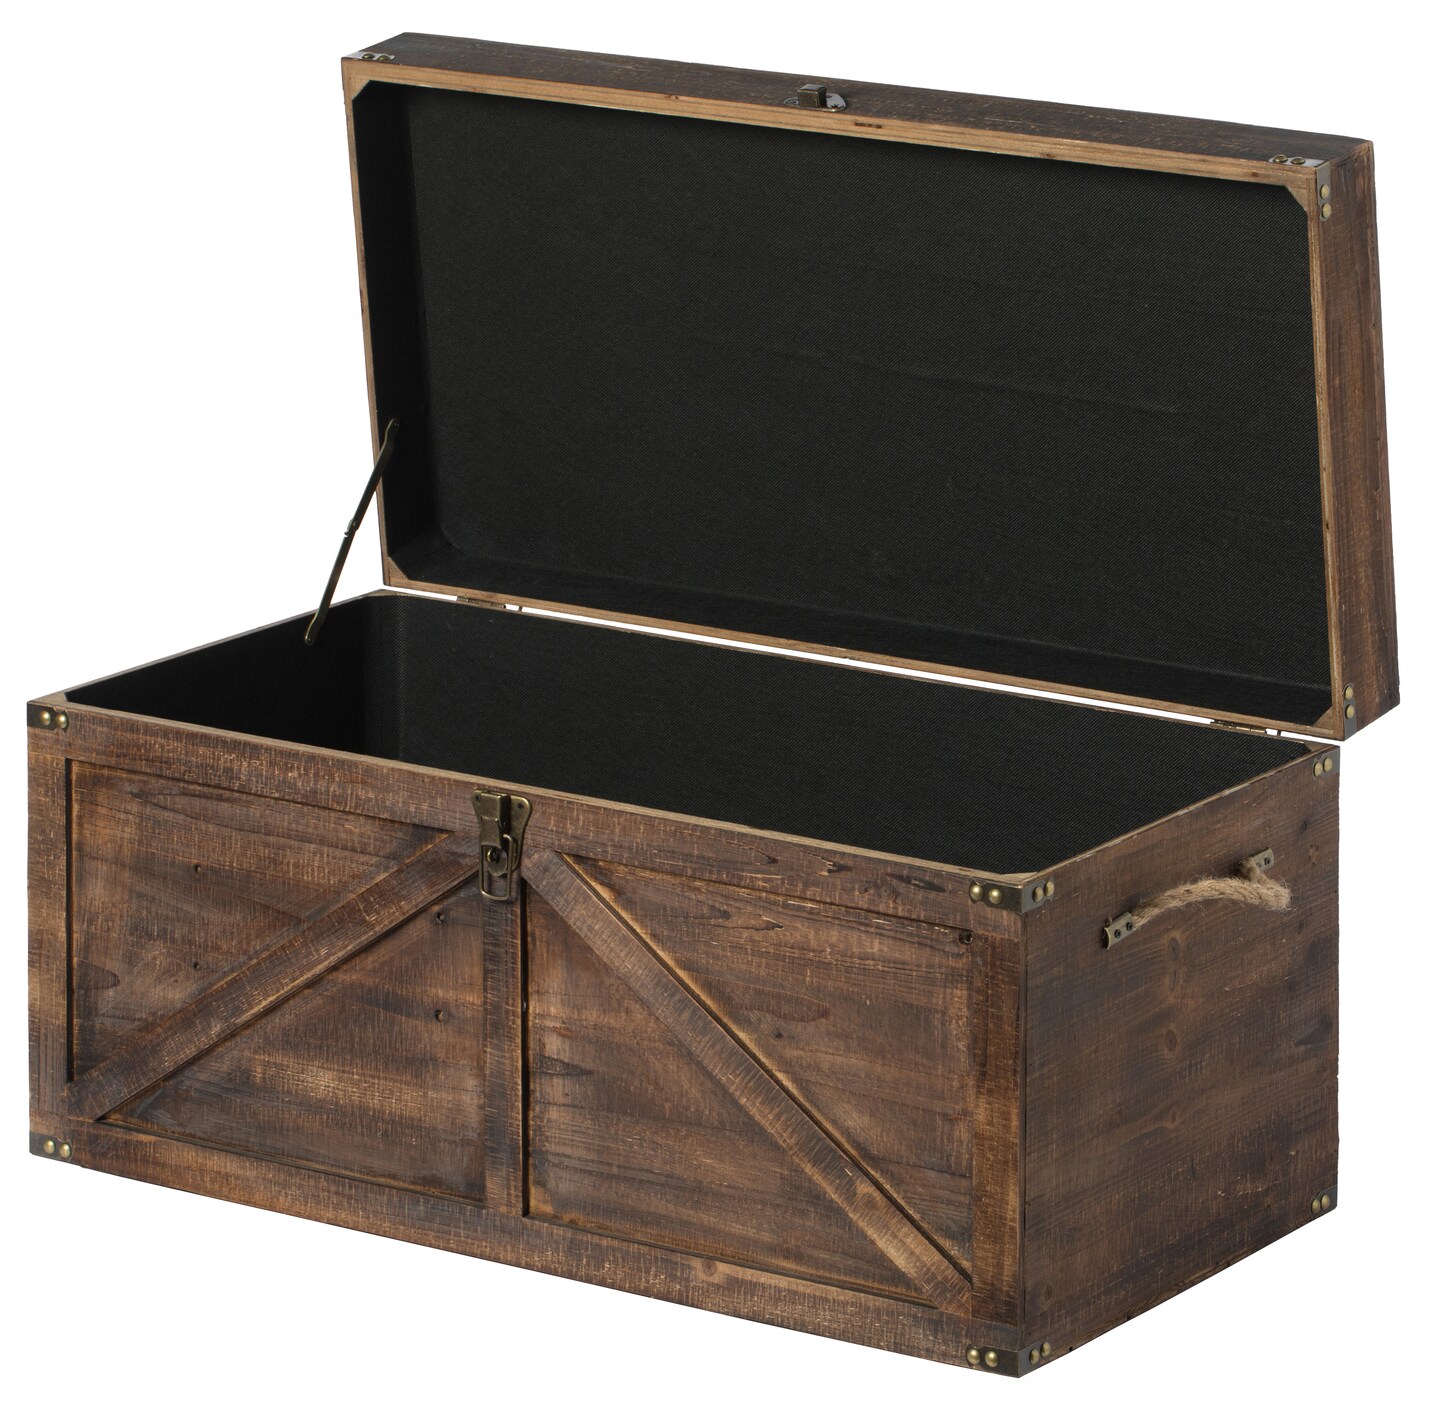 Brown Large Wooden Lockable Trunk Farmhouse Style Rustic Design Lined Storage Chest with Rope Handles